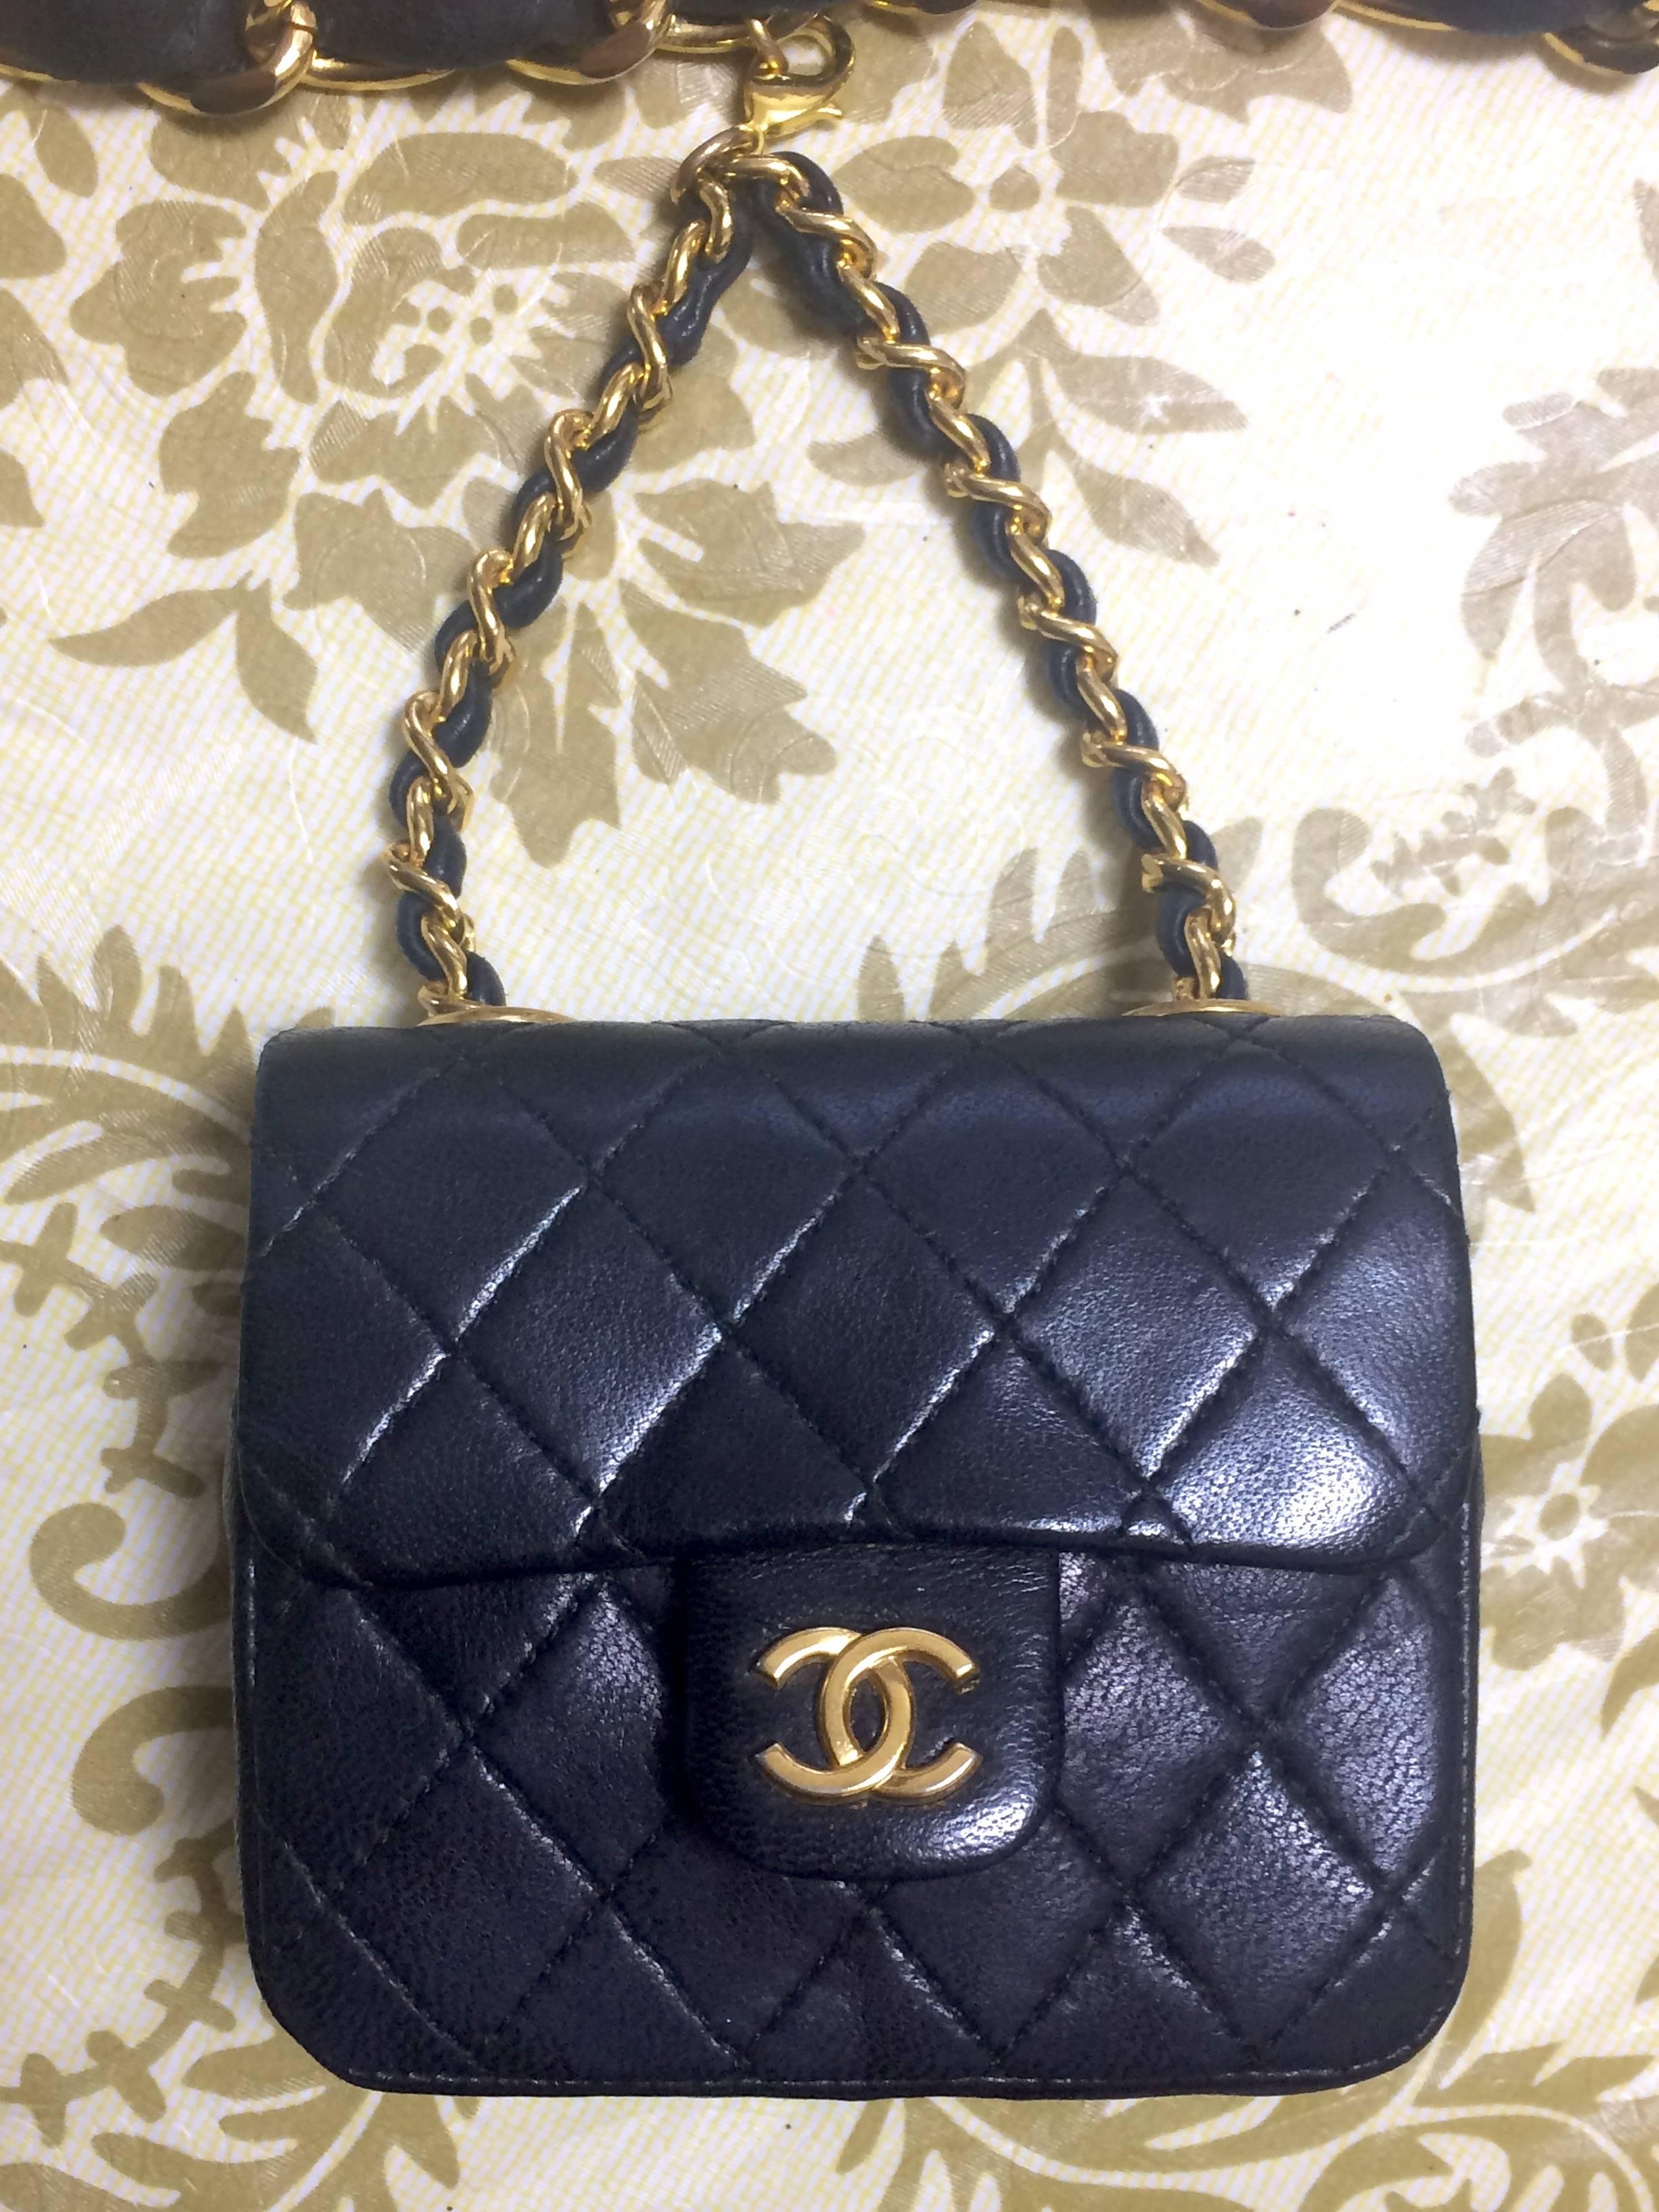 1980s. Vintage CHANEL black lambskin mini 2.55 bag charm chain leather belt with golden CC charm. Must have.

Here is another fabulous piece from CHANEL back in the era of 80's, a black leather golden chain belt with its iconic mini 2.55 bag pouch